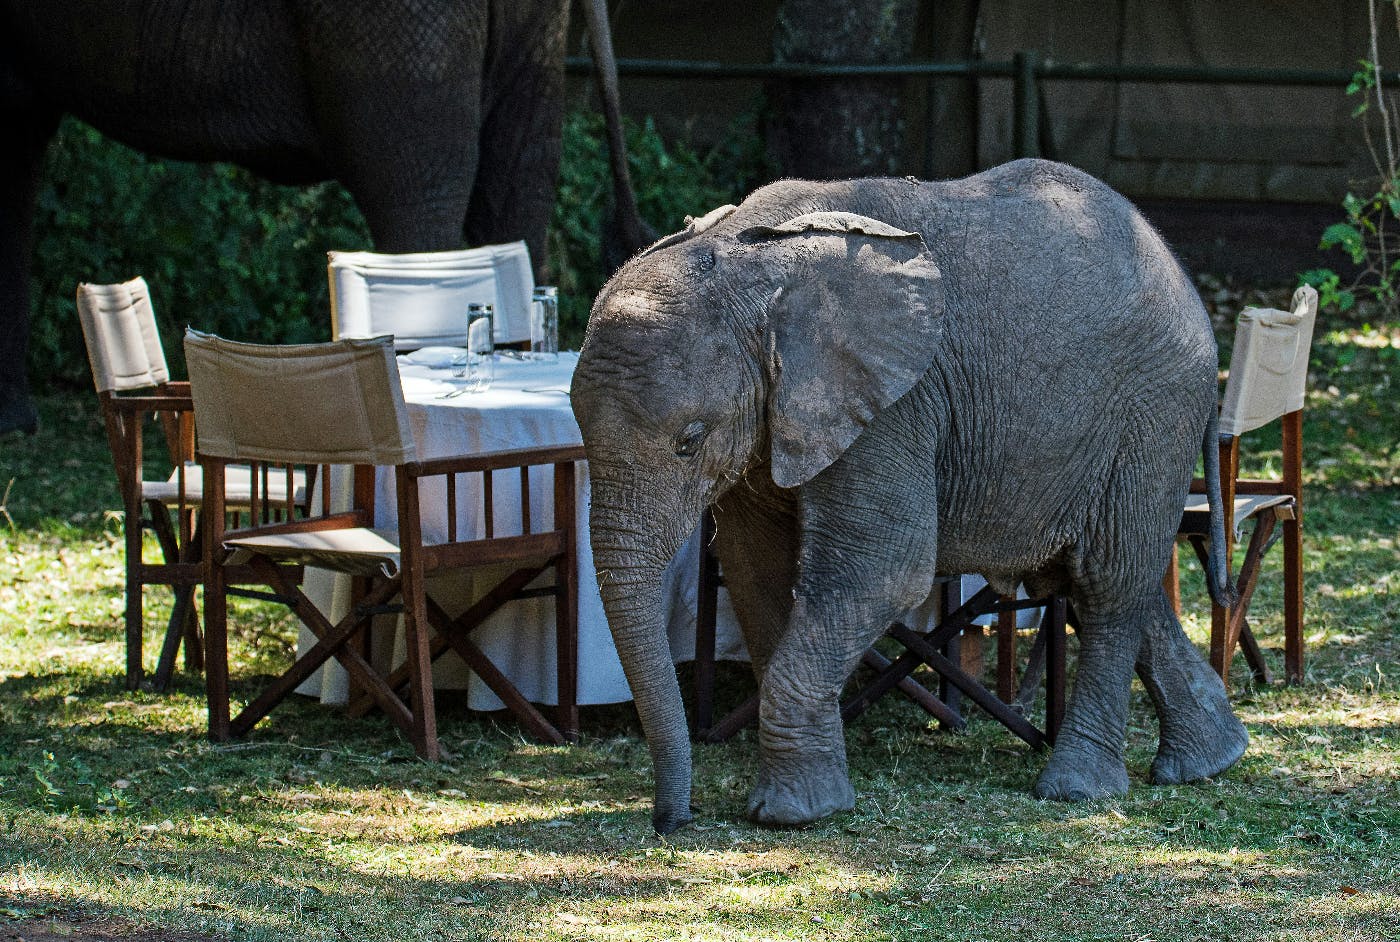 An outside dinning table and a baby elephant walking by it